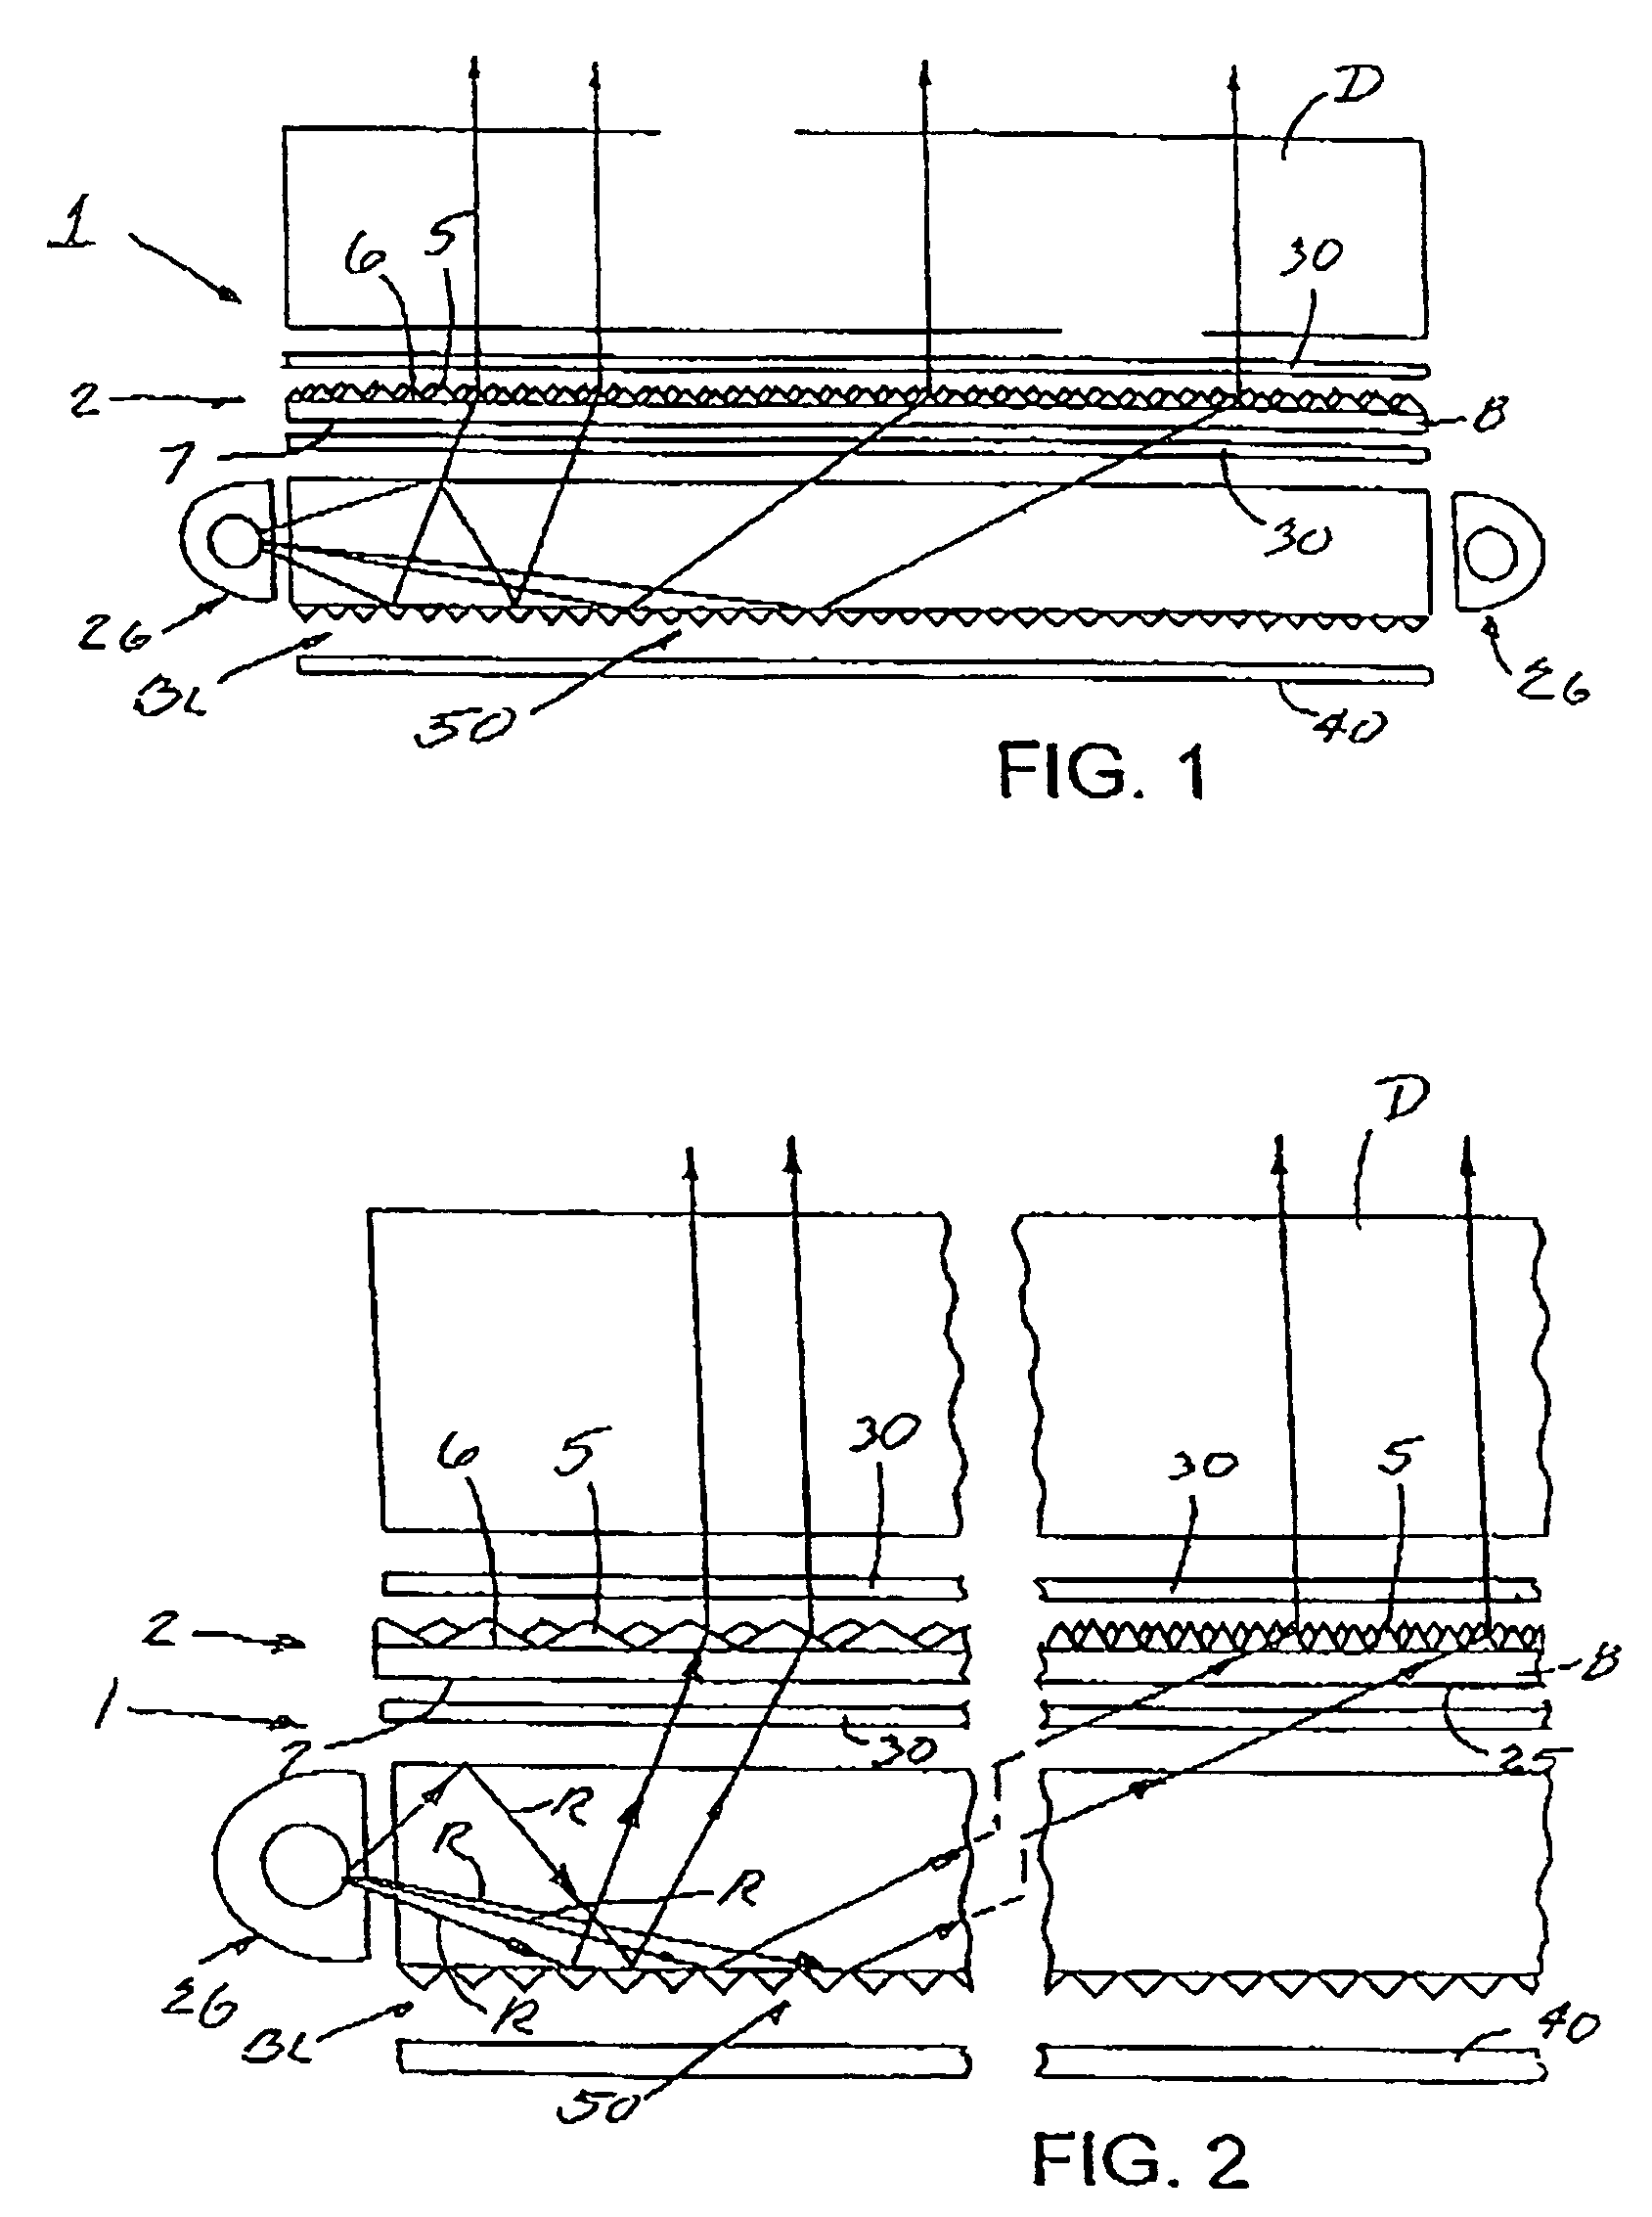 Smooth compliant belt for use with molding roller